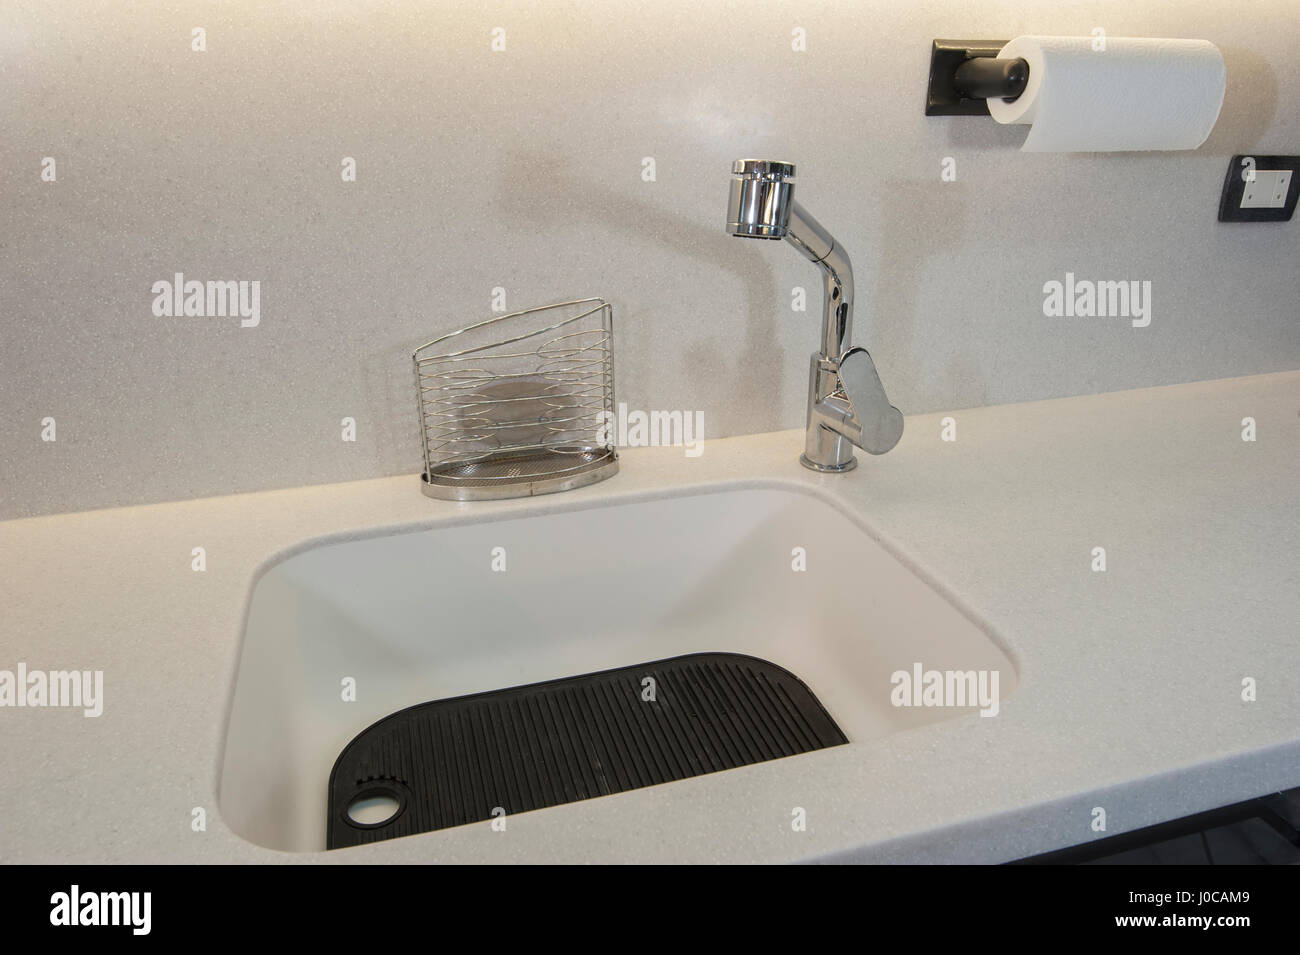 Interior design decor of kitchen in luxury apartment with sink and faucet Stock Photo